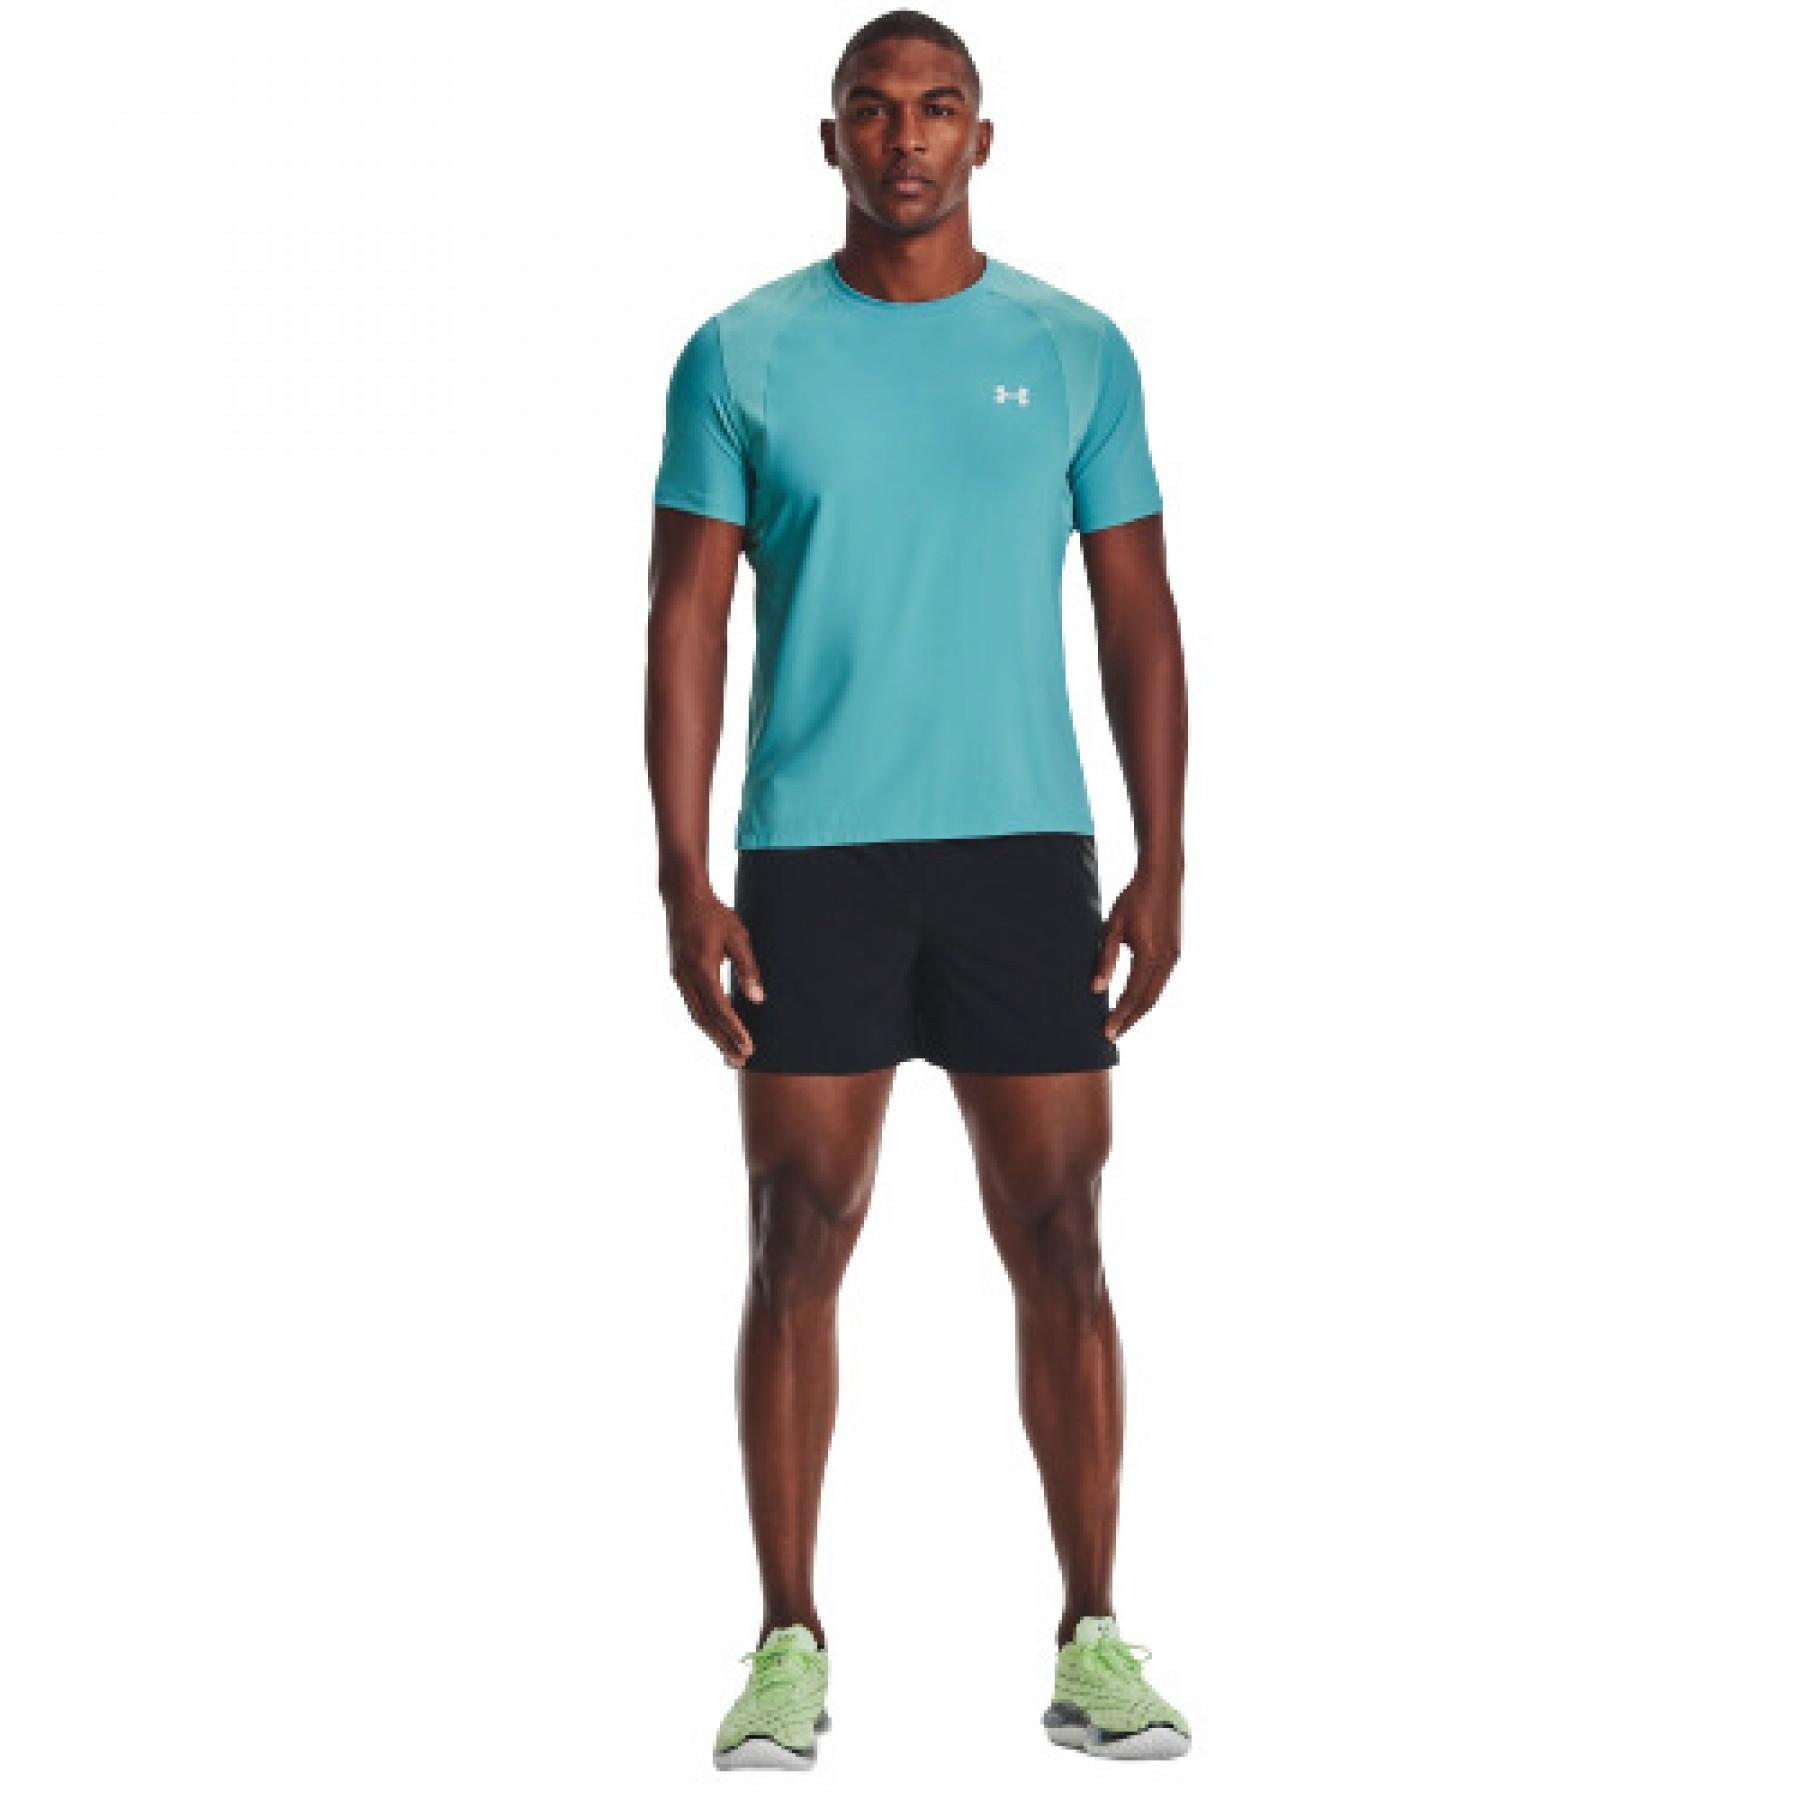 T-shirt Under Armour iso-chill run